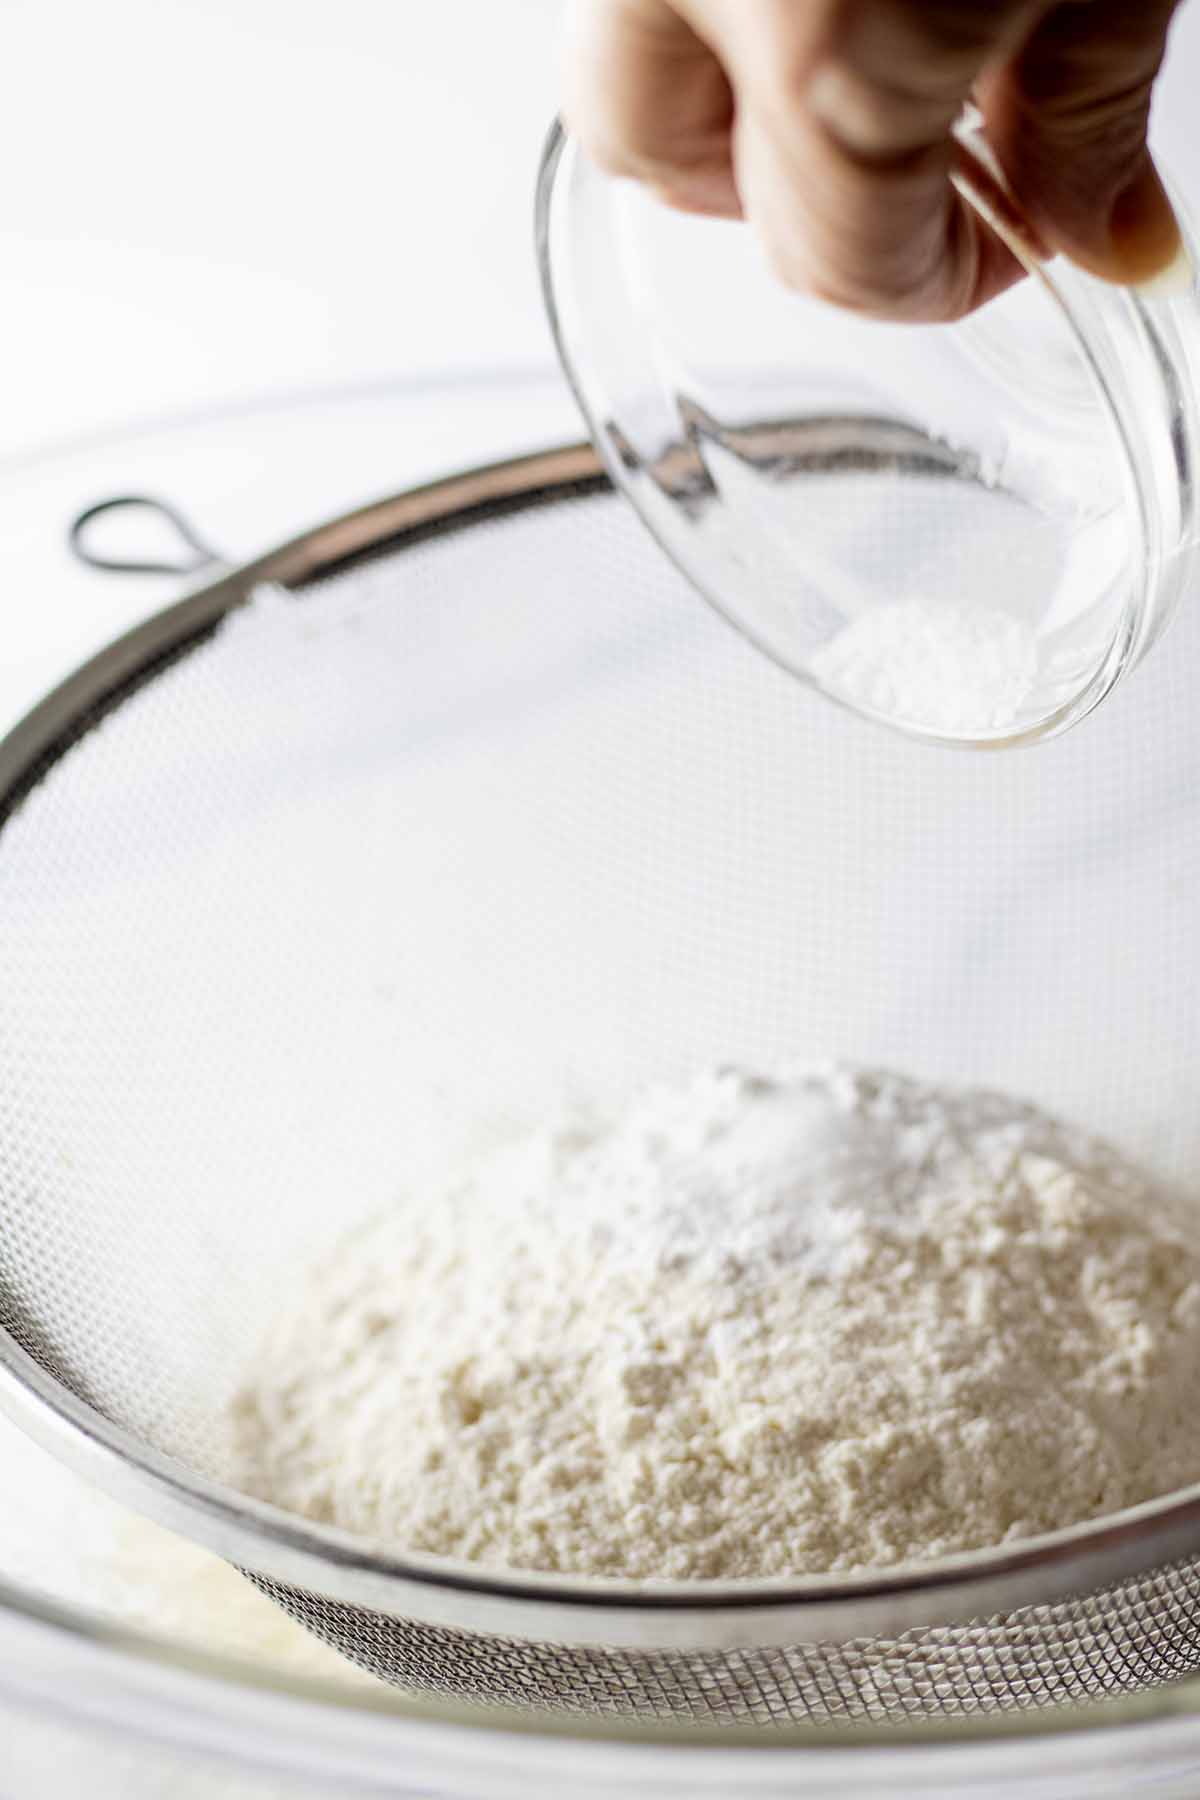 Dry ingredients being sifted through a mesh strainer into a glass bowl